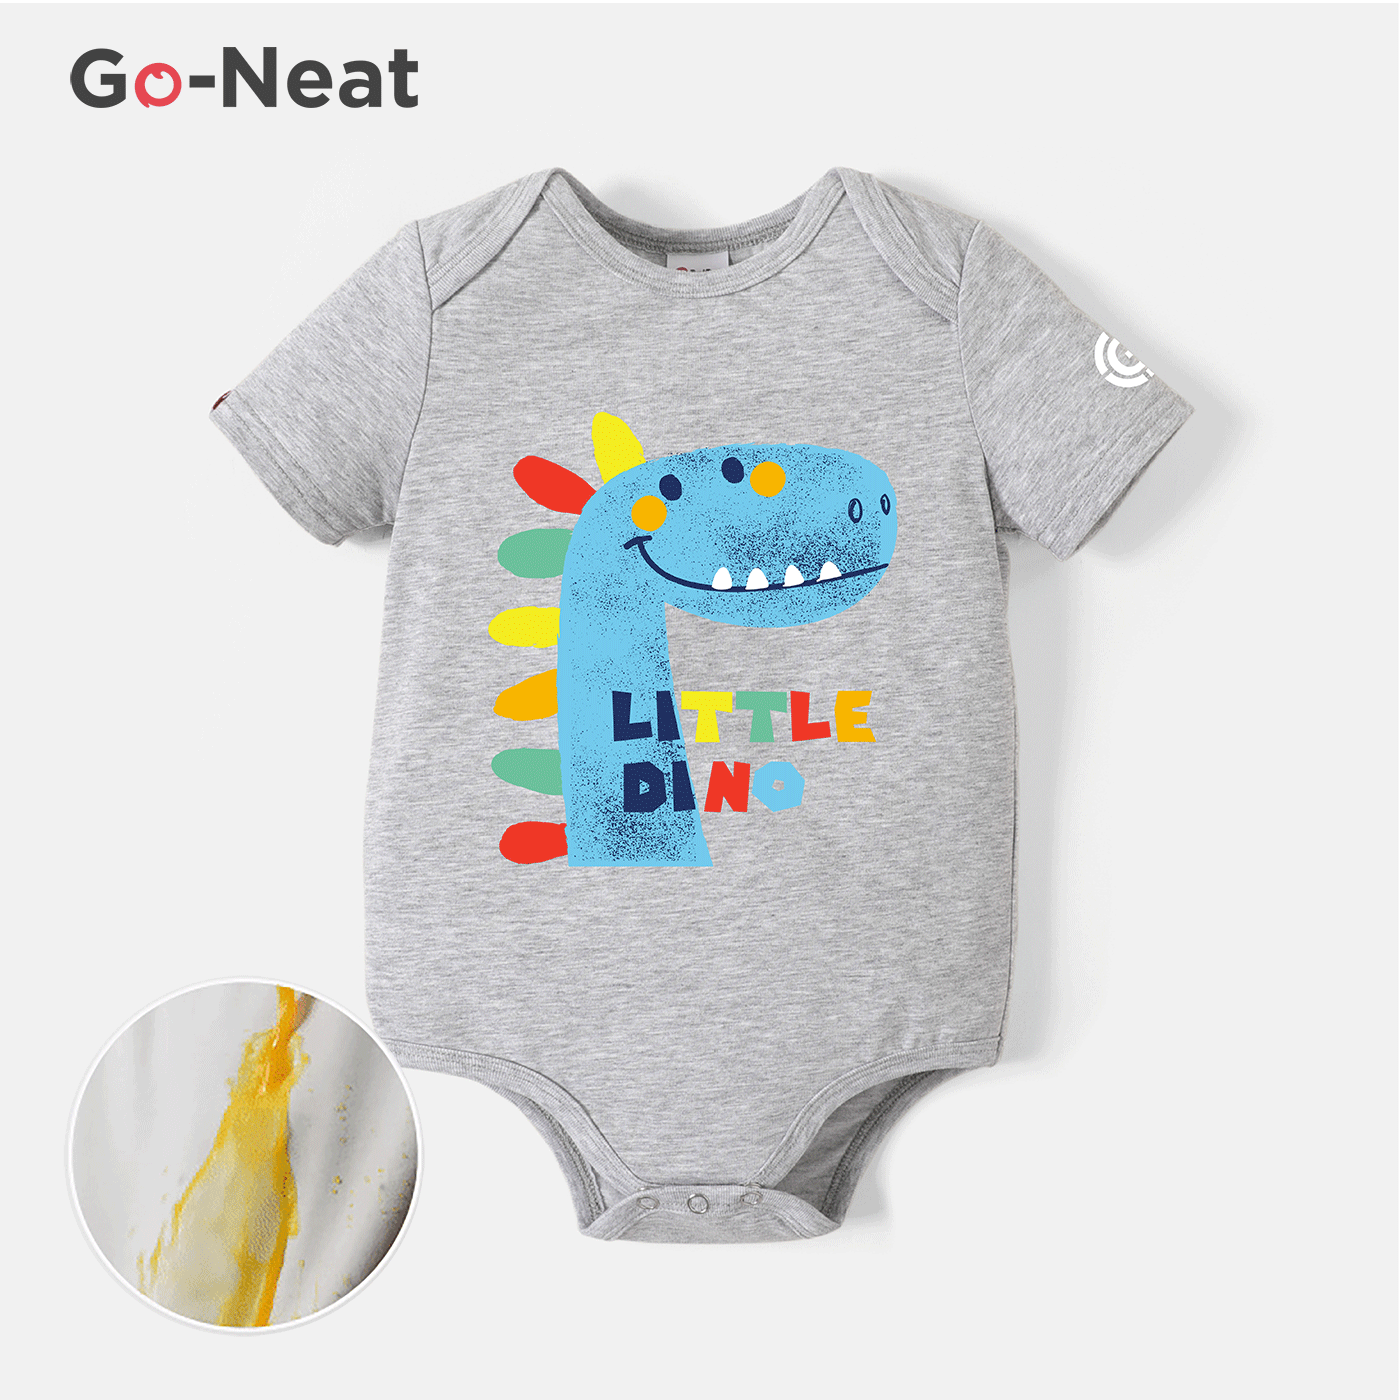 [0M-24M] Go-Neat Water Repellent and Stain Resistant Baby Boy/Girl Colorful Dinosaur & Letter Print Short-sleeve Romper